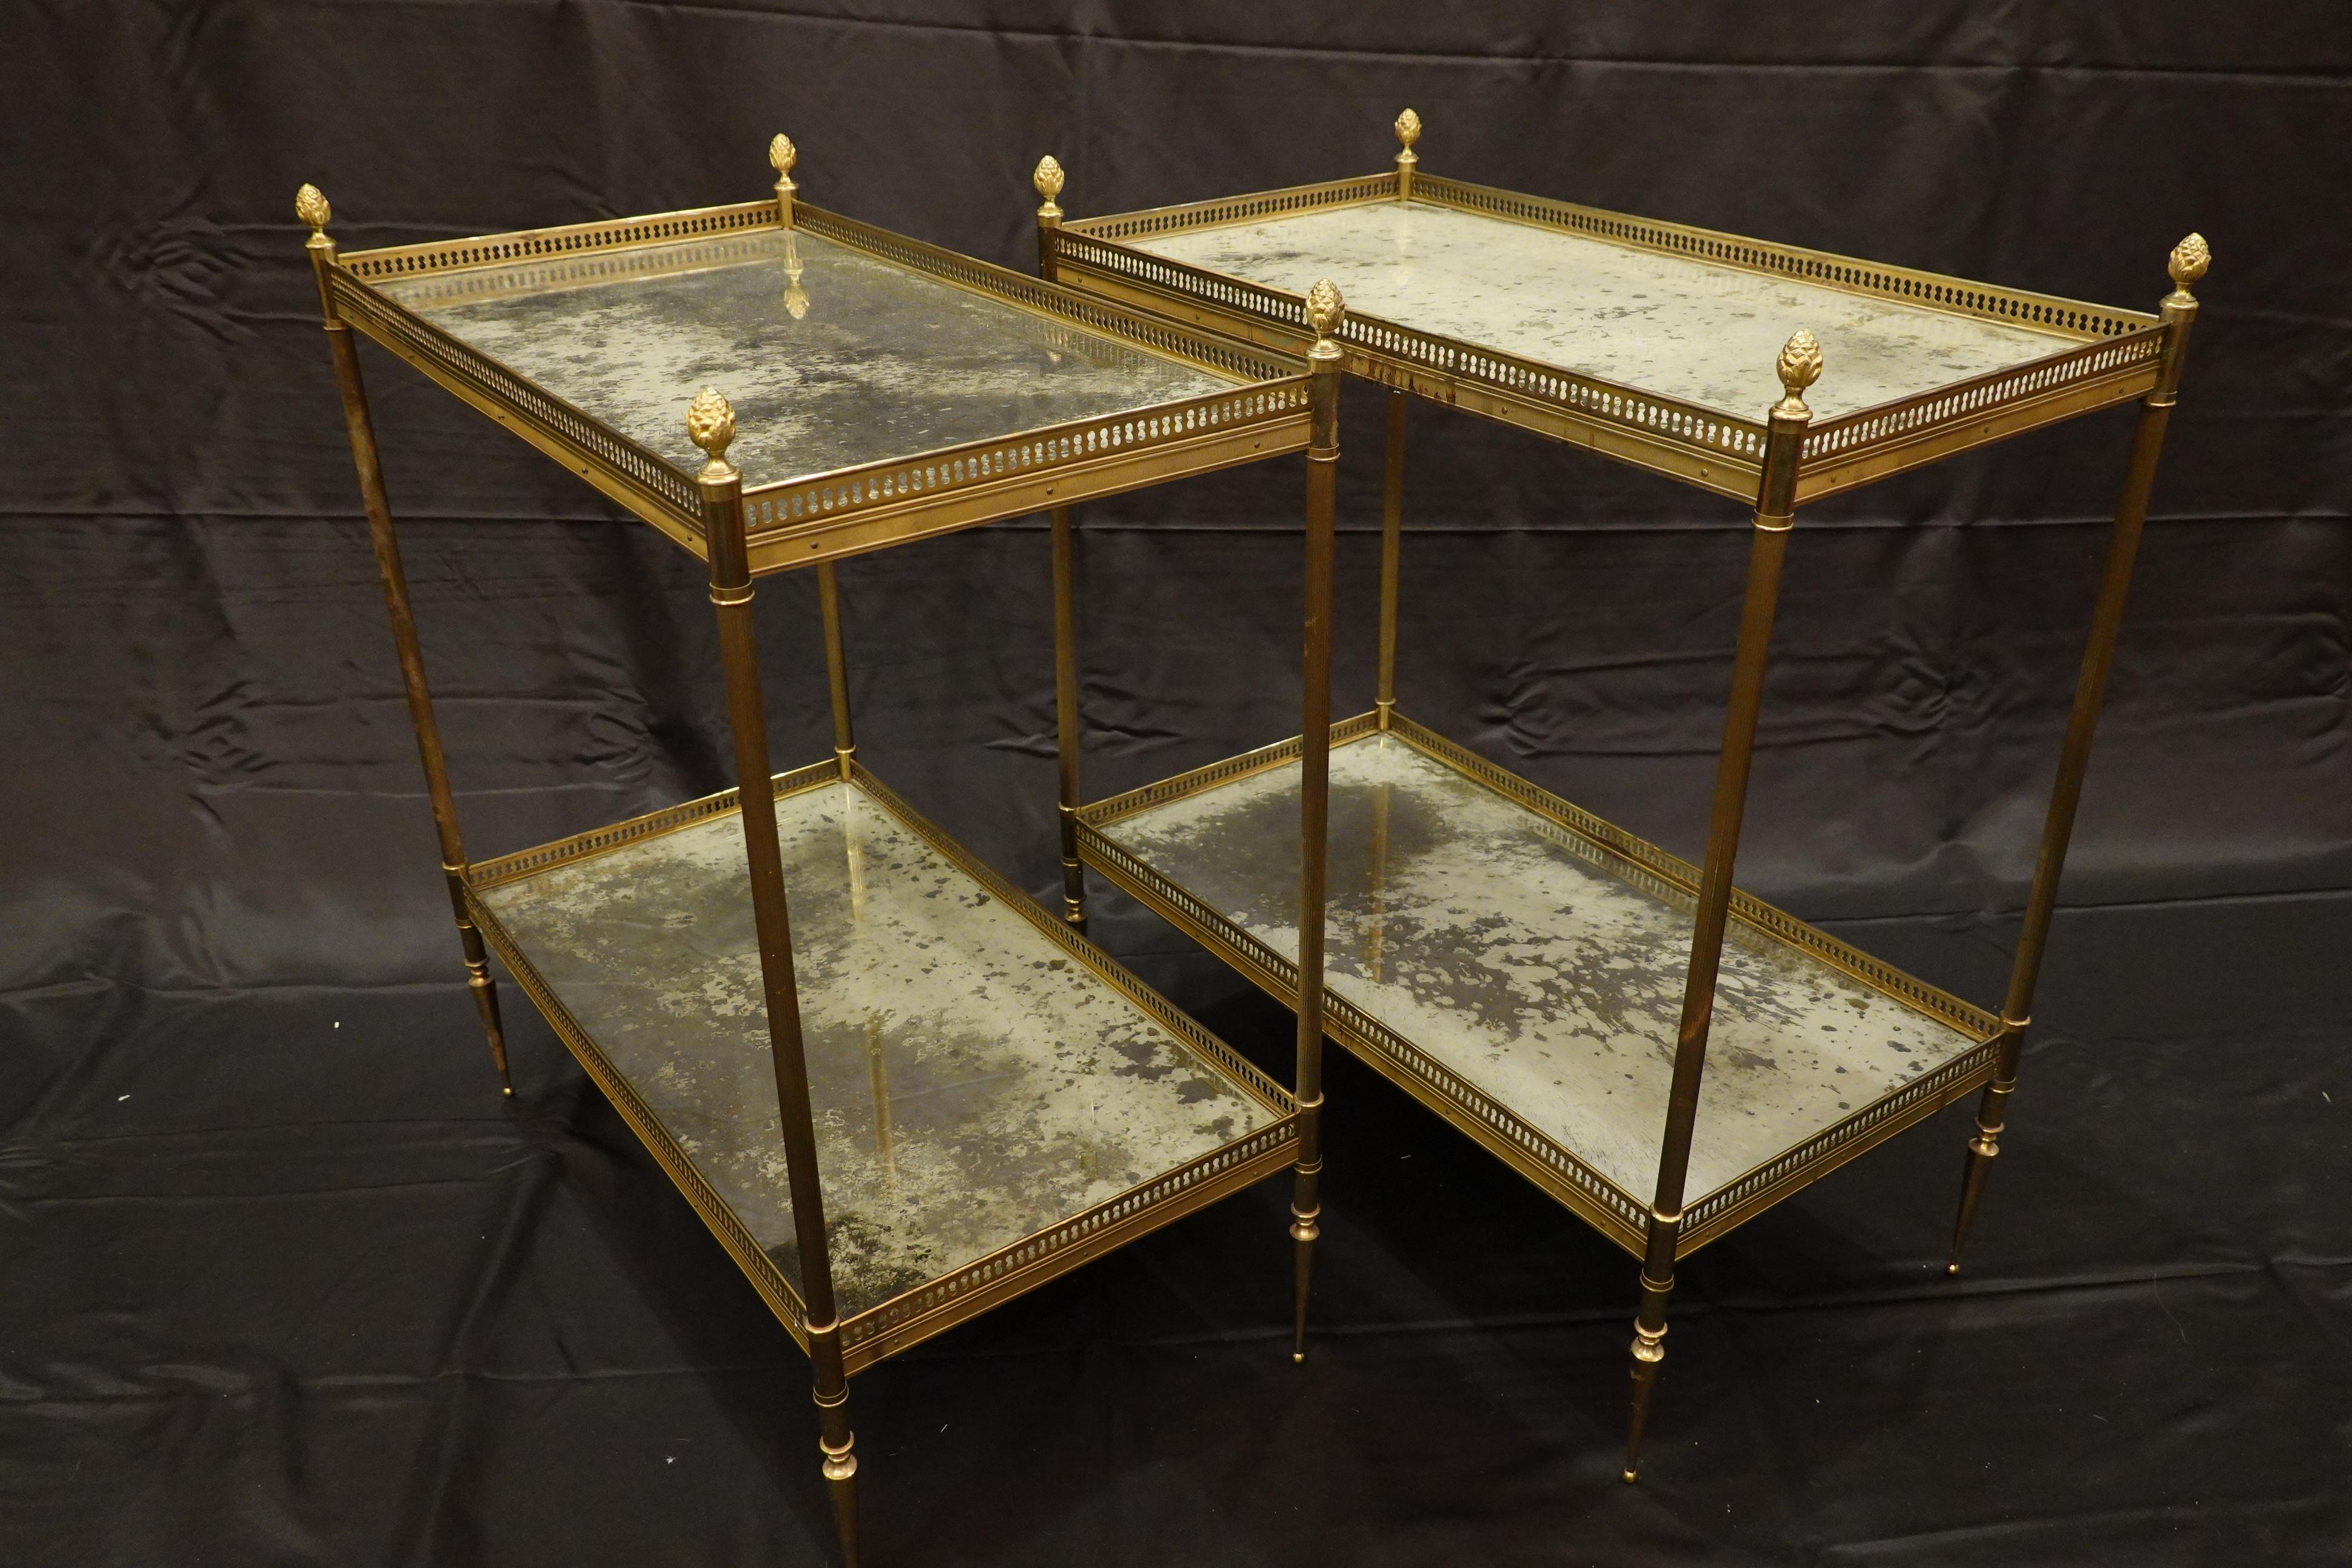 Pair of French brass two-tiered side tables, with églomisé tops and detailed brass and bronze frames, attributed to Maison Jansen. The tables feature pierced galleries, fluted legs topped with gilded bronze pine cone finials and ending in tapered